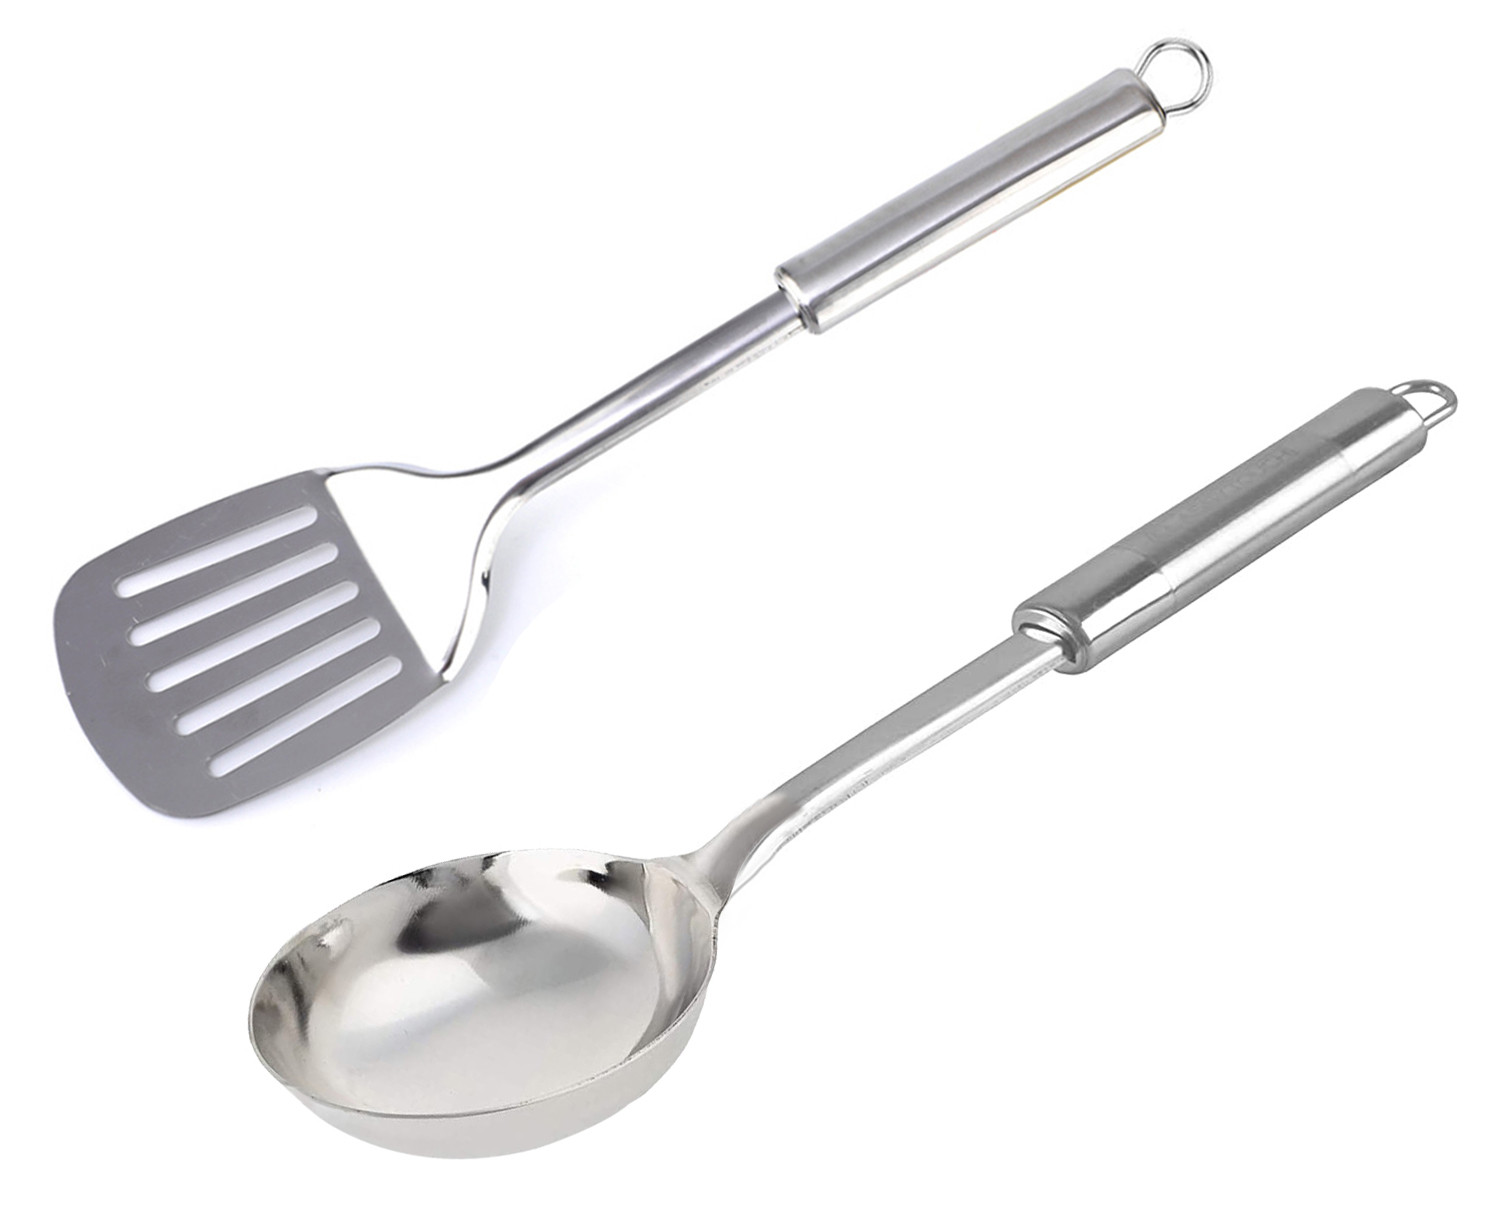 Kuber Industries Stainless Steel Kitchen Utensil Set of 2 (Slotted Turner & Ladle) Cooking Utensils - Nonstick Kitchen Utensils Cookware Set Best Kitchen Gadgets Kitchen Tool Set Gift (Silver)